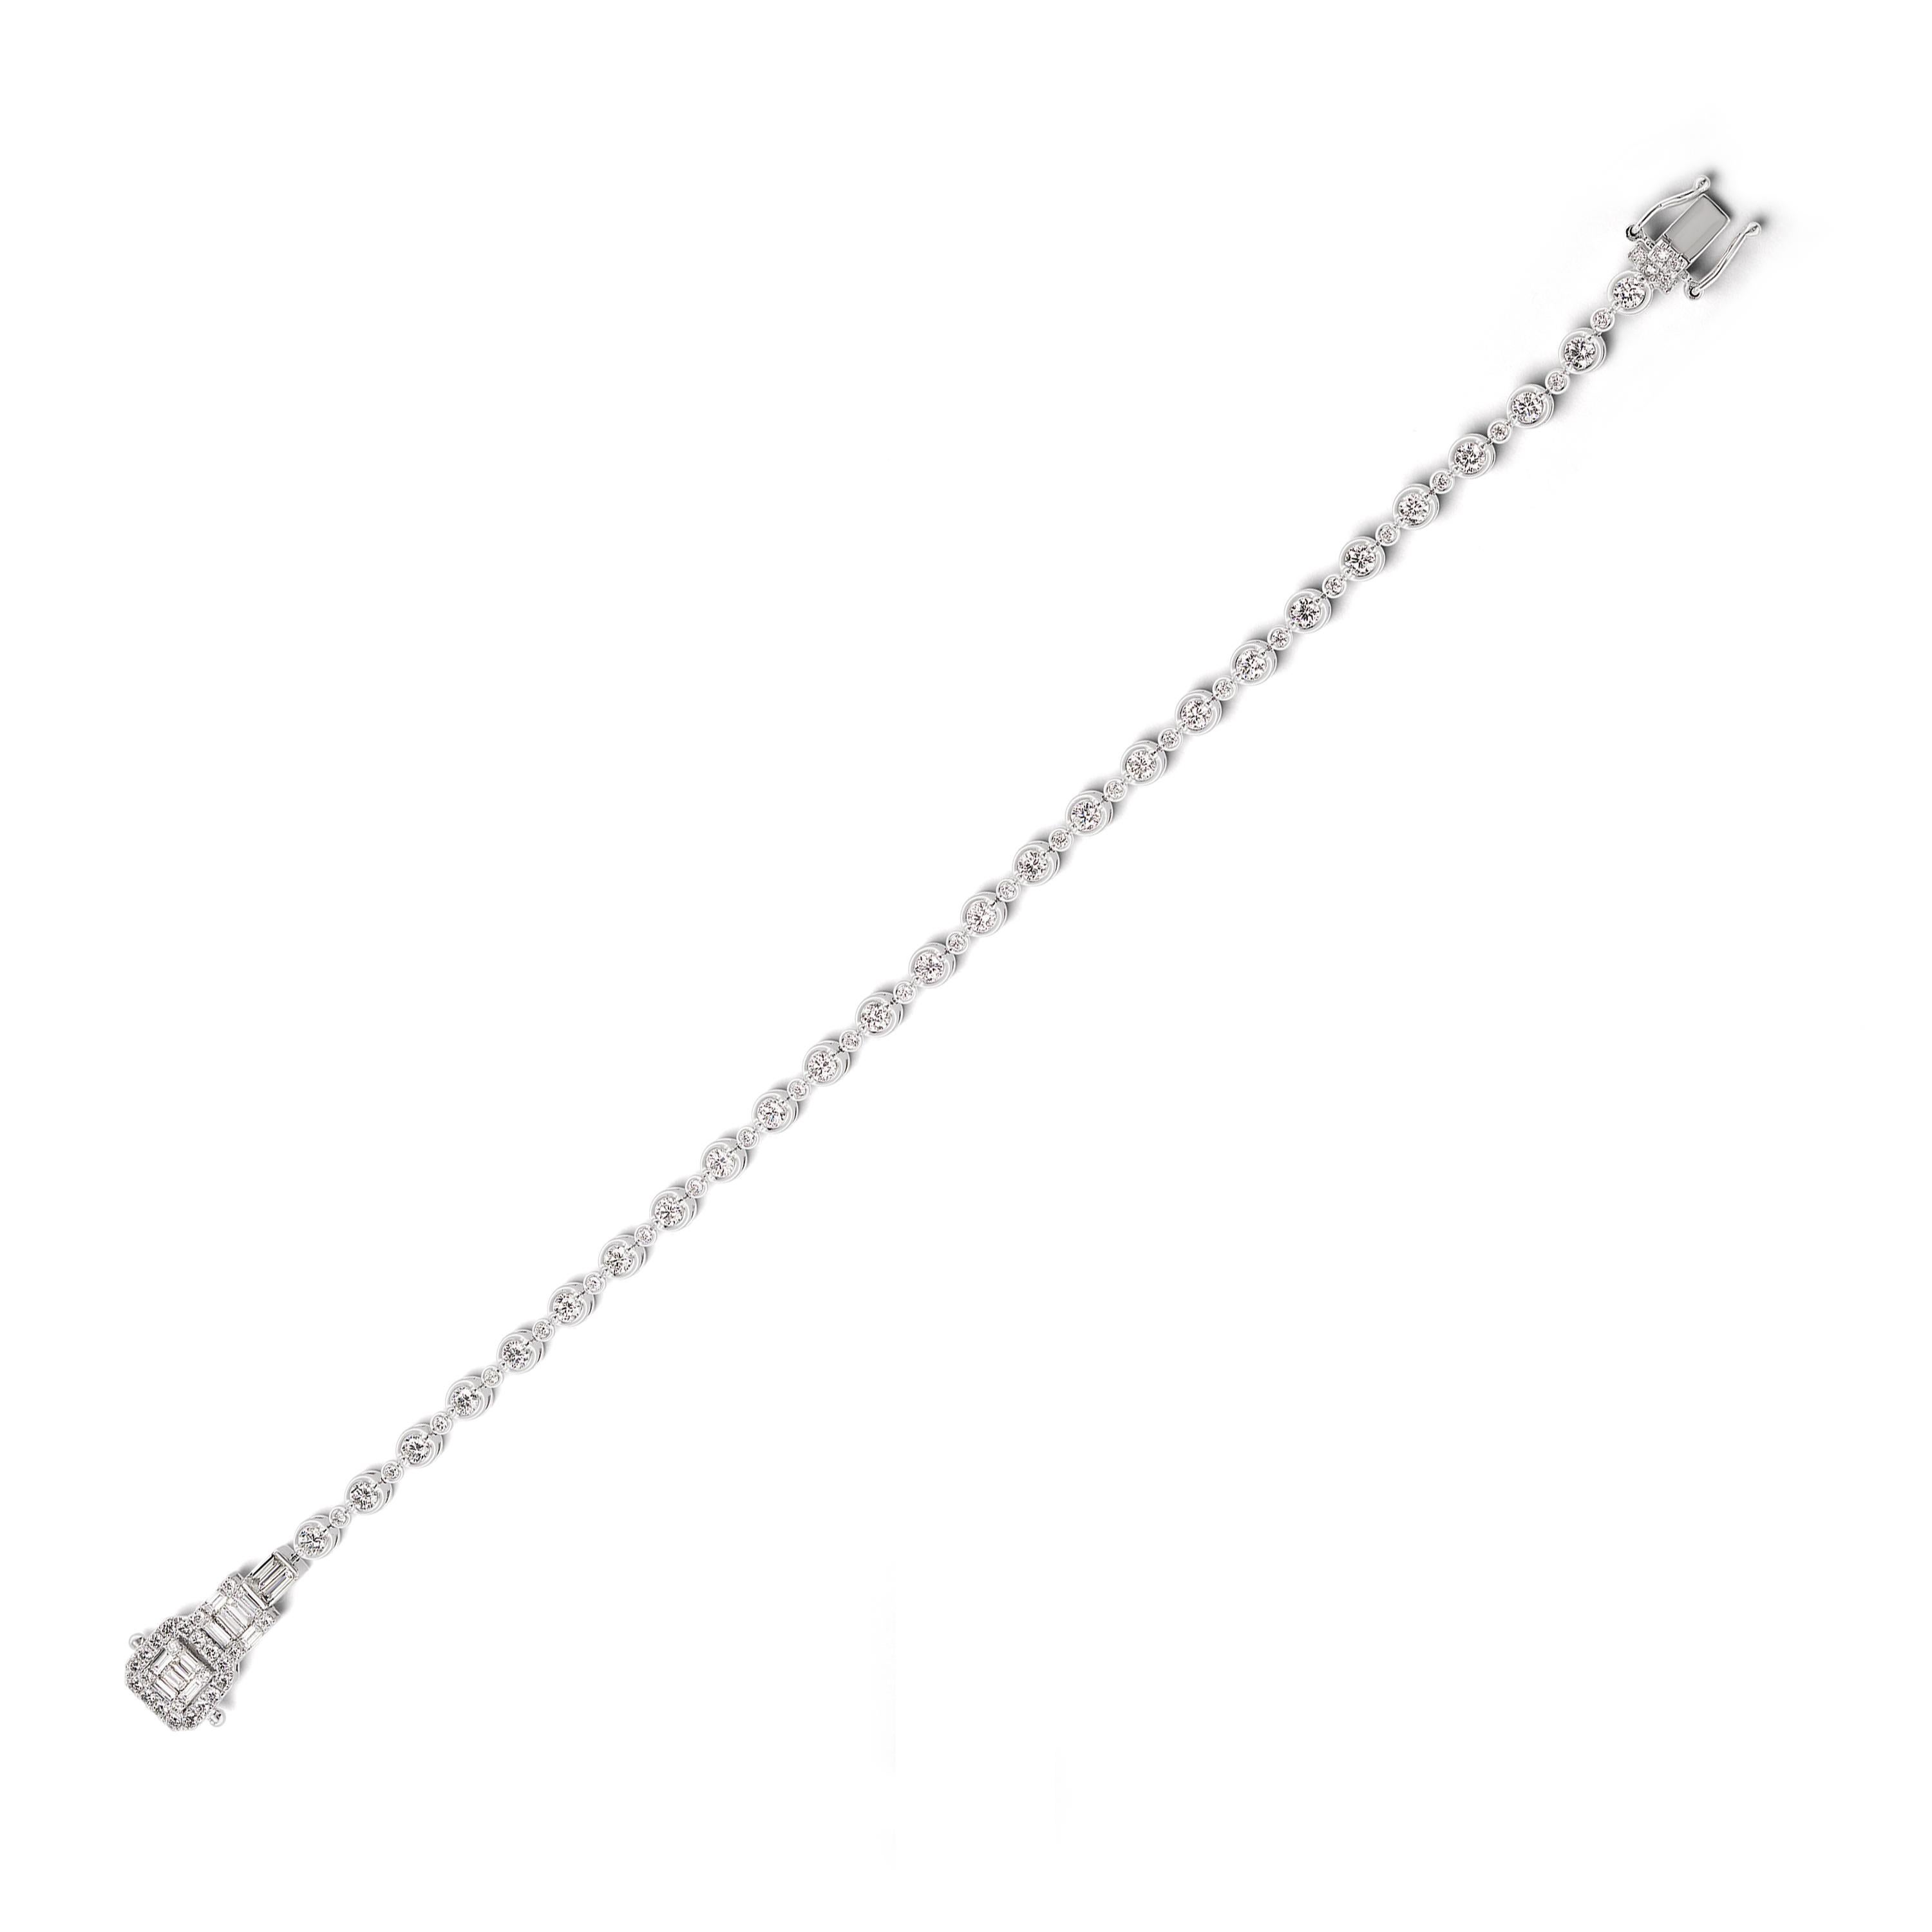 The perfect classic addition to your jewellery wardrobe. This station bracelet is featured with 14 baguette diamonds and 80 bezel set round diamonds. Double latch safety, box clasp 18K white gold station bracelet.

JEWELRY SPECIFICATION:
Total Metal